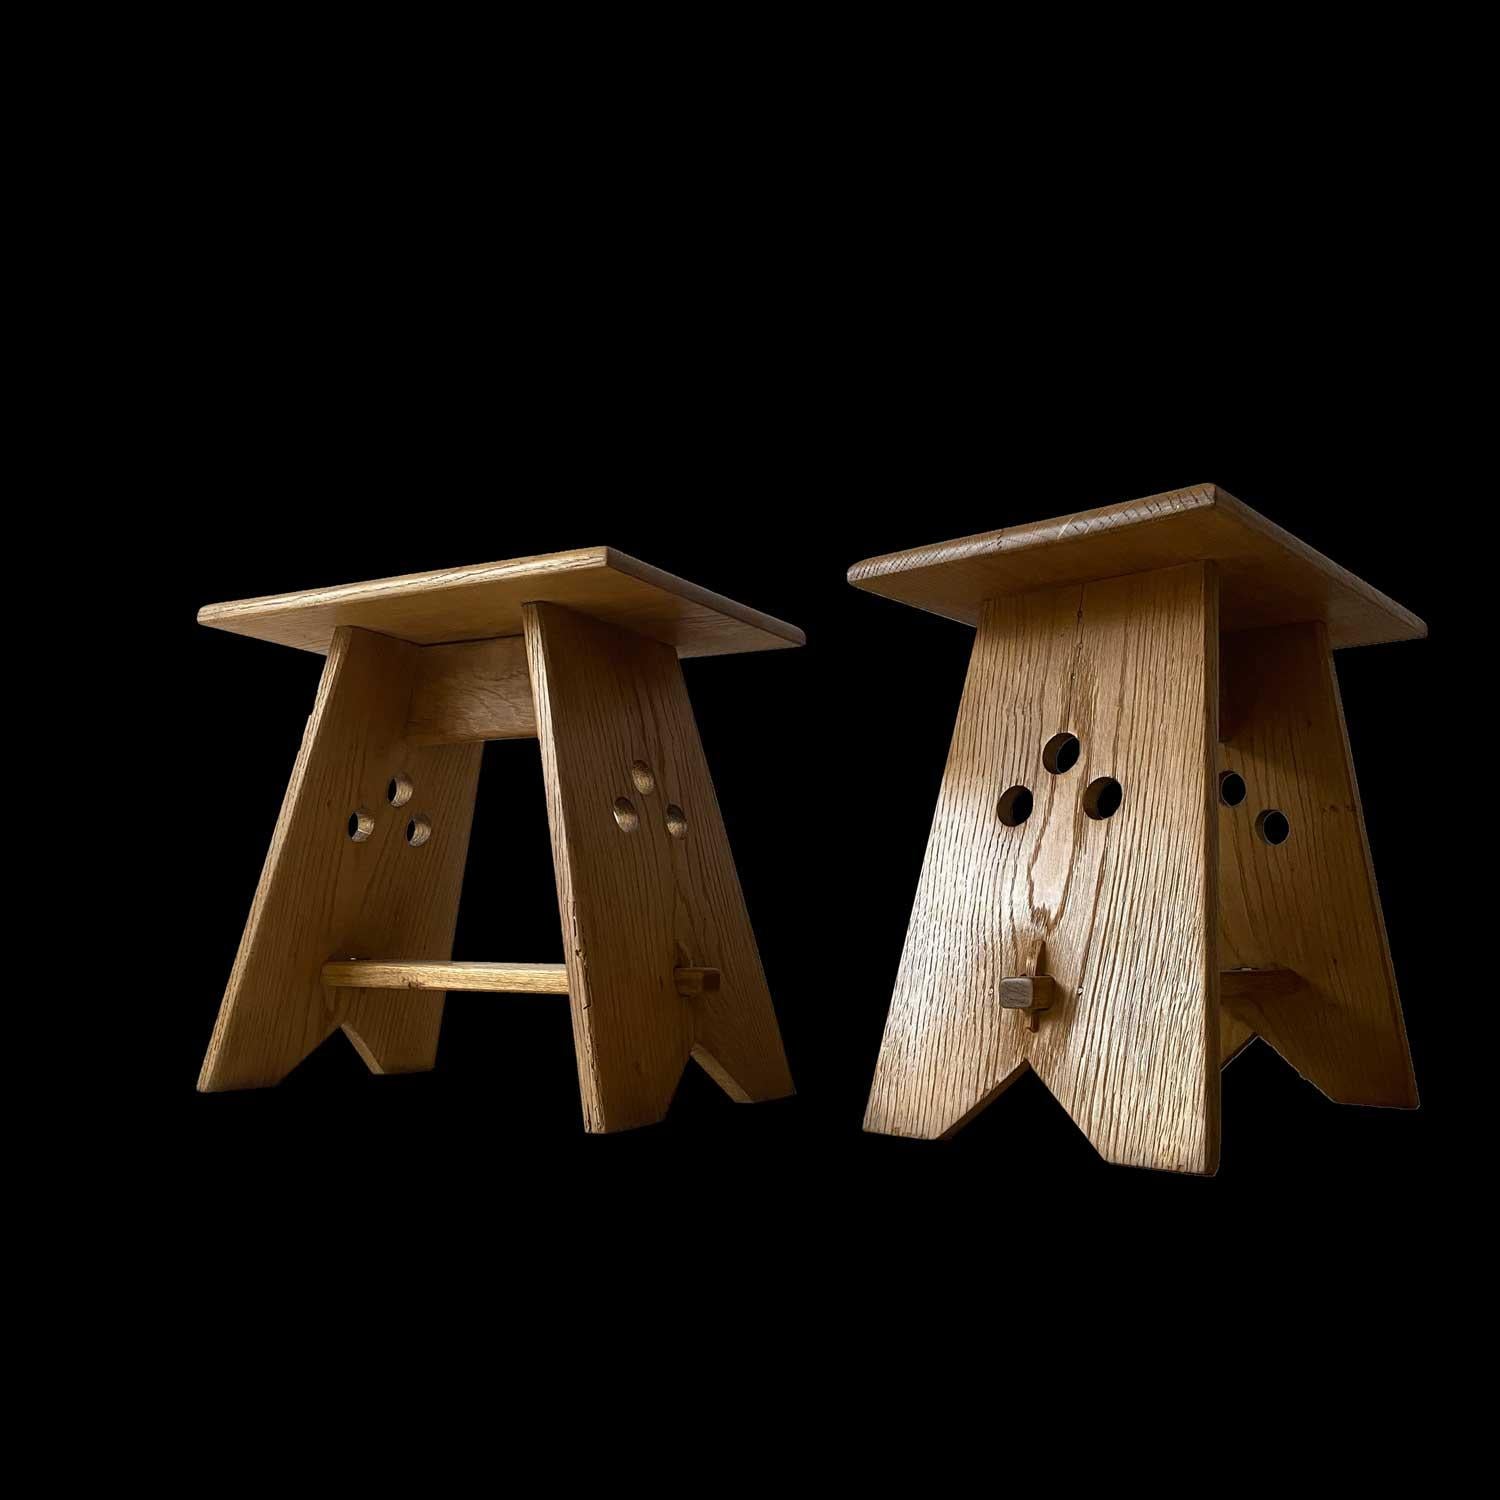 Christian Durupt
Pair of oak stools from a chalet in Chamonix built by the architect Christian Durupt, collaborator of Charlotte Perriand notably in Meribel les Allues
